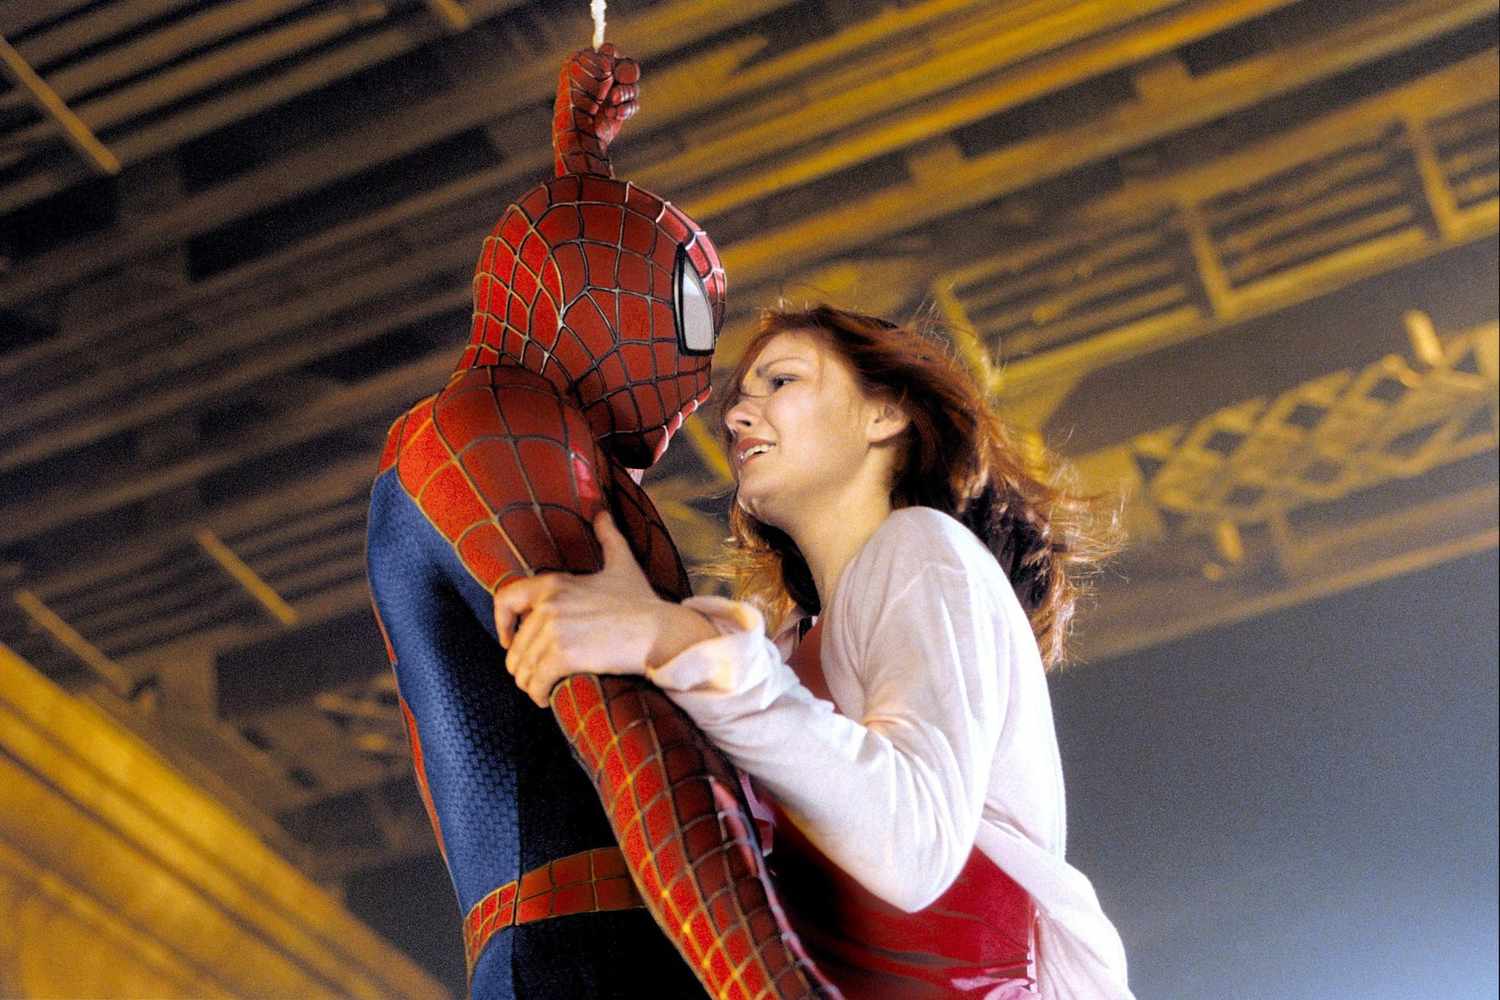 SPIDER-MAN, Tobey Maguire, Kirstin Dunst, 2002, (c) Columbia Pictures/courtesy Everett Collection